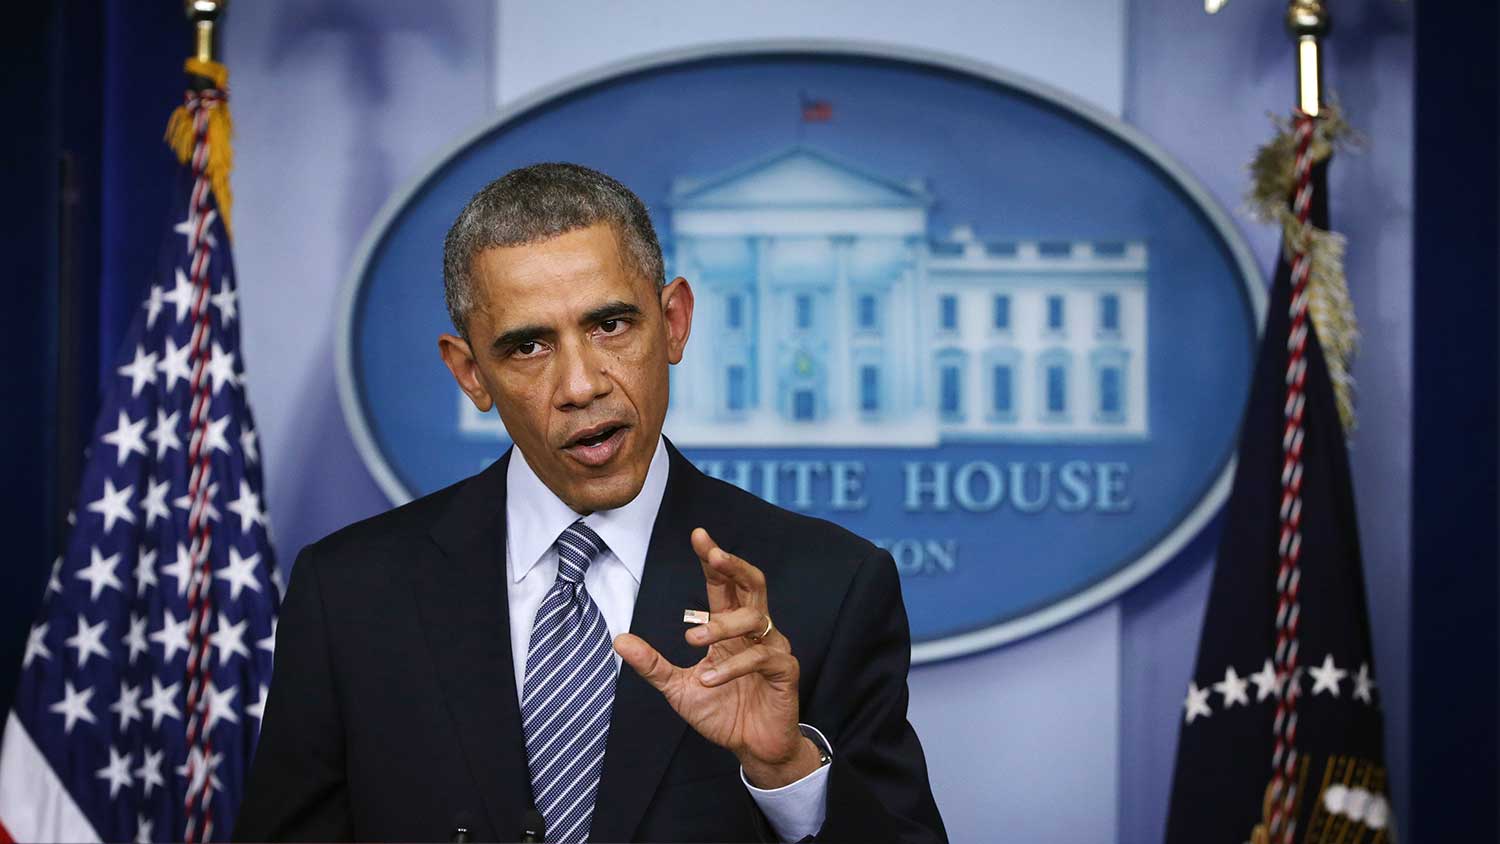 U.S. President Barack Obama makes a statement following the announcement of the grand jury's decision in the shooting death of unnamed black teenager Michael Brown in Ferguson, Missouri, at the James Brady Press Briefing Room of the White House November 24, 2014 in Washington, DC.
